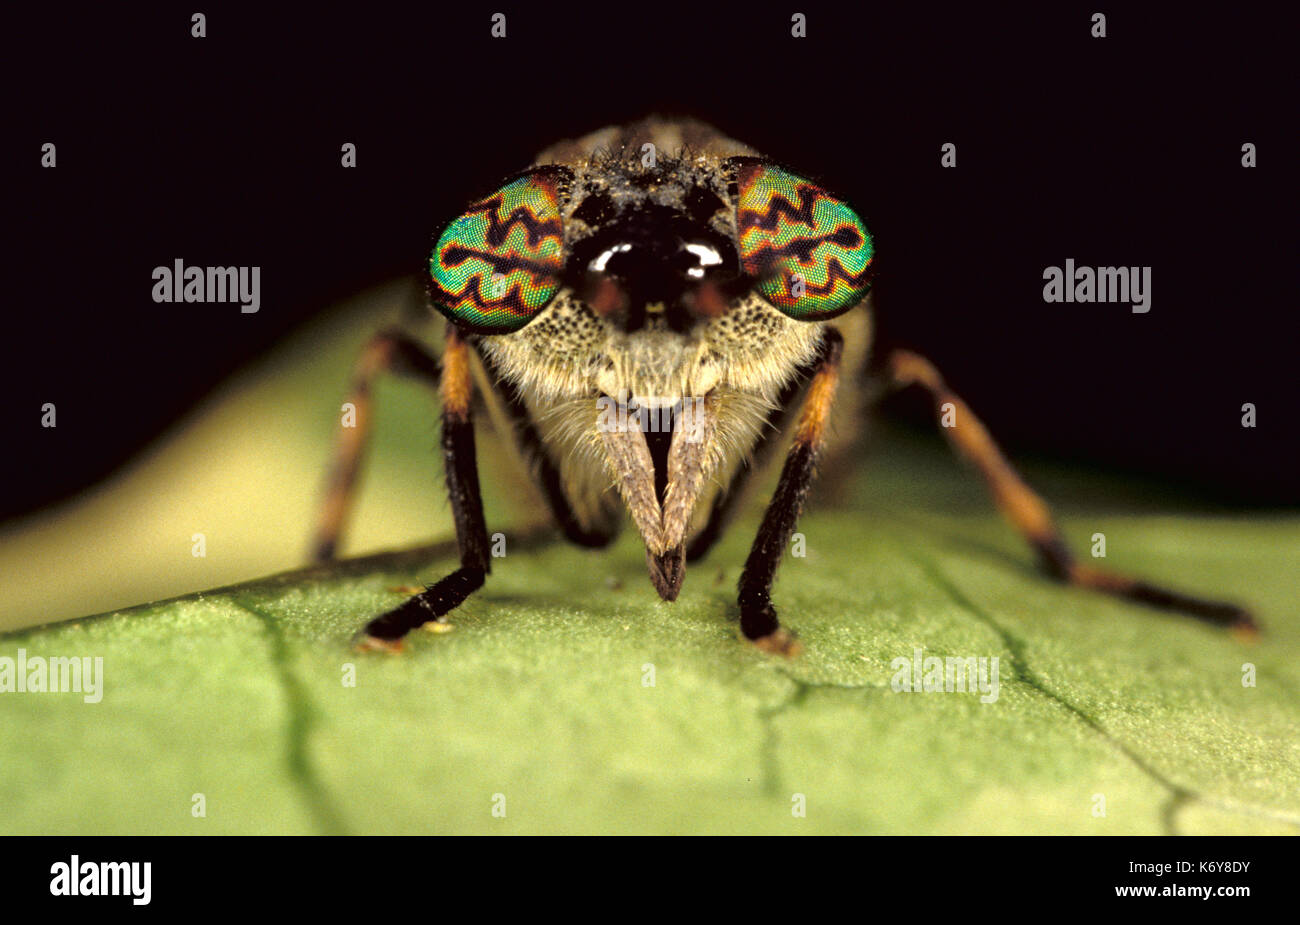 Close up of Horsefly, Tabanus sp. UK, showing compound eye and coloured patterns, true fly Stock Photo